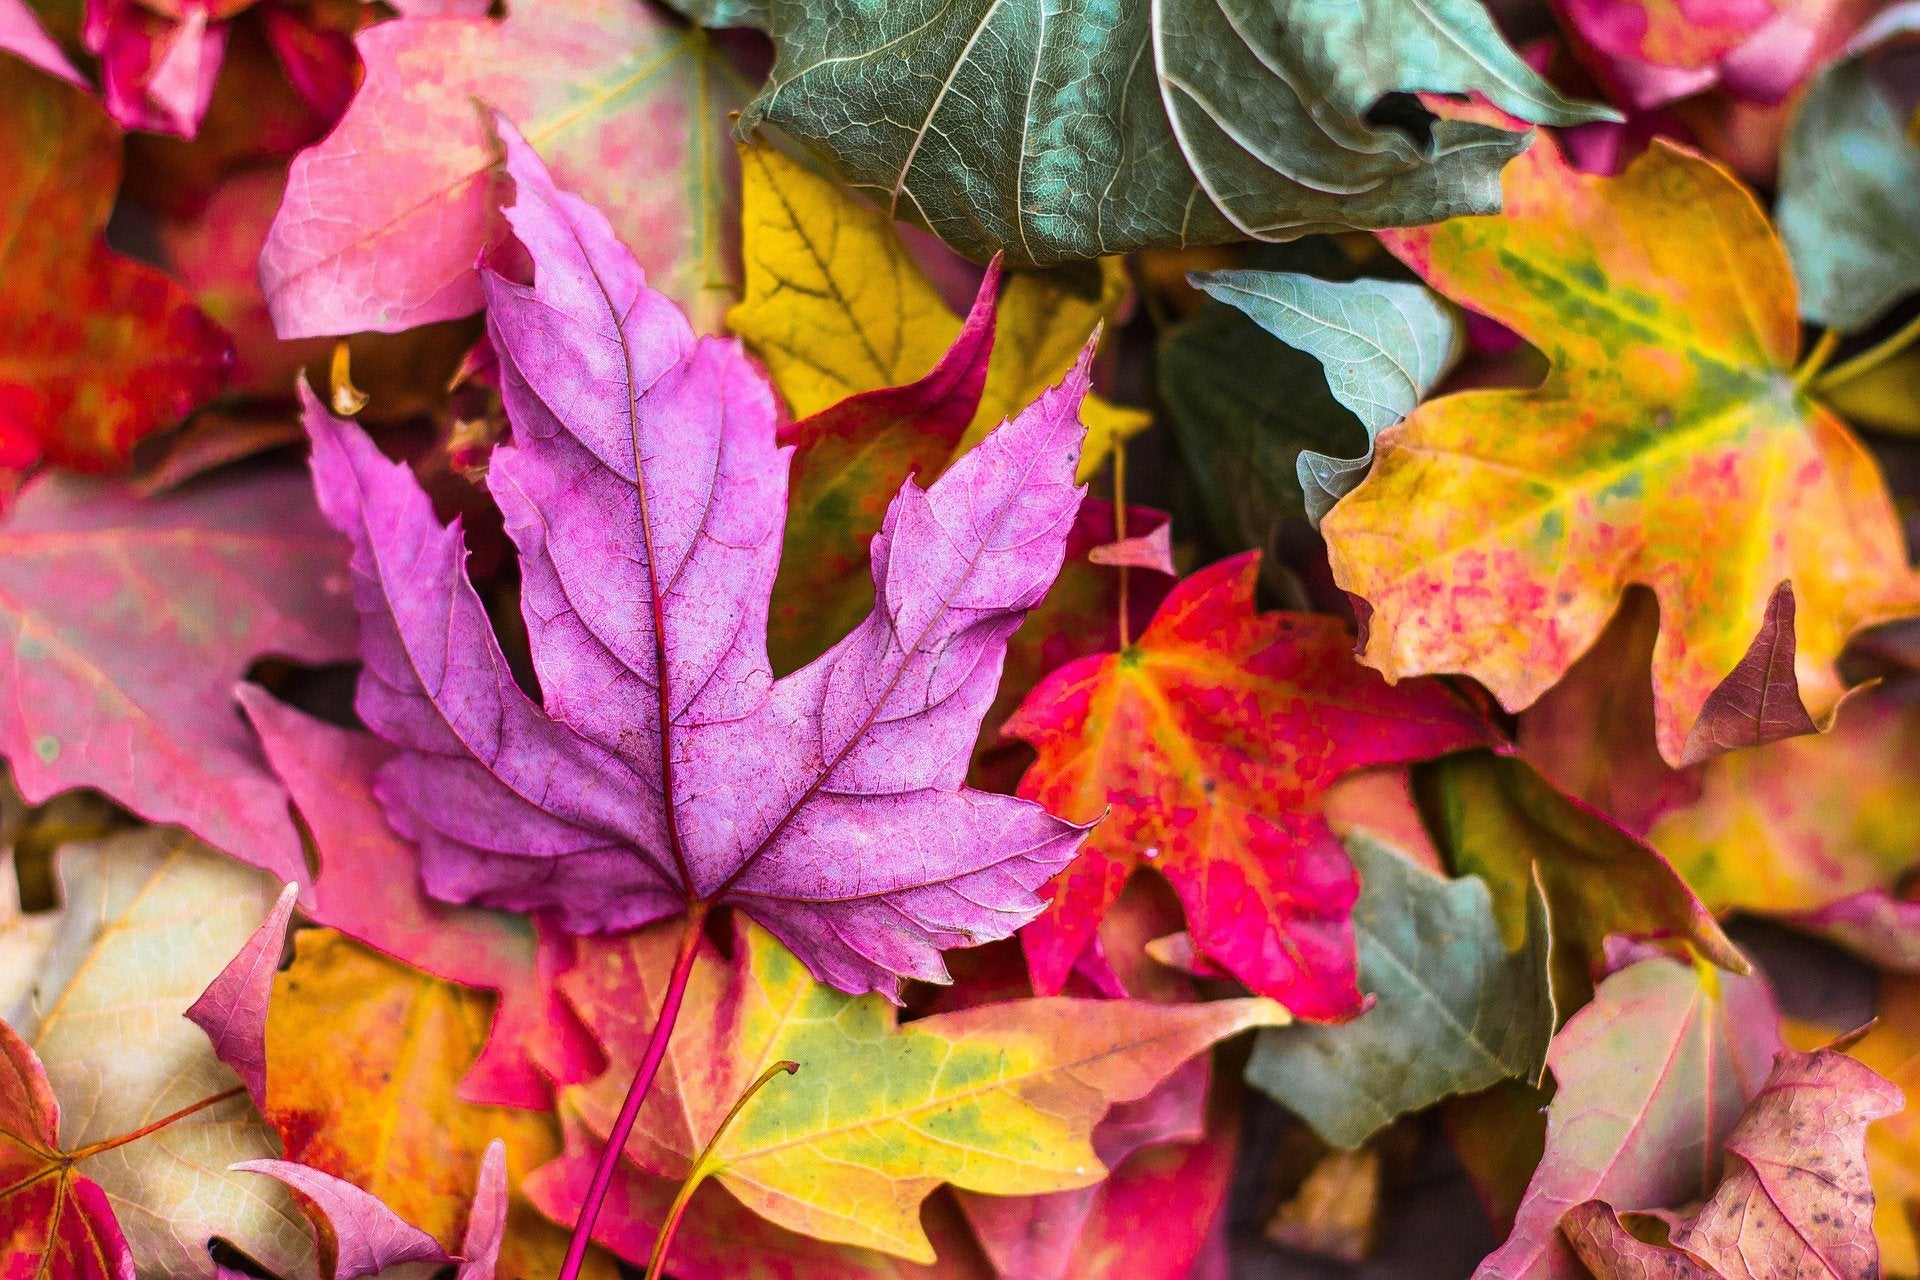 6 Activities to Help You Find Grounding & Connection This Fall